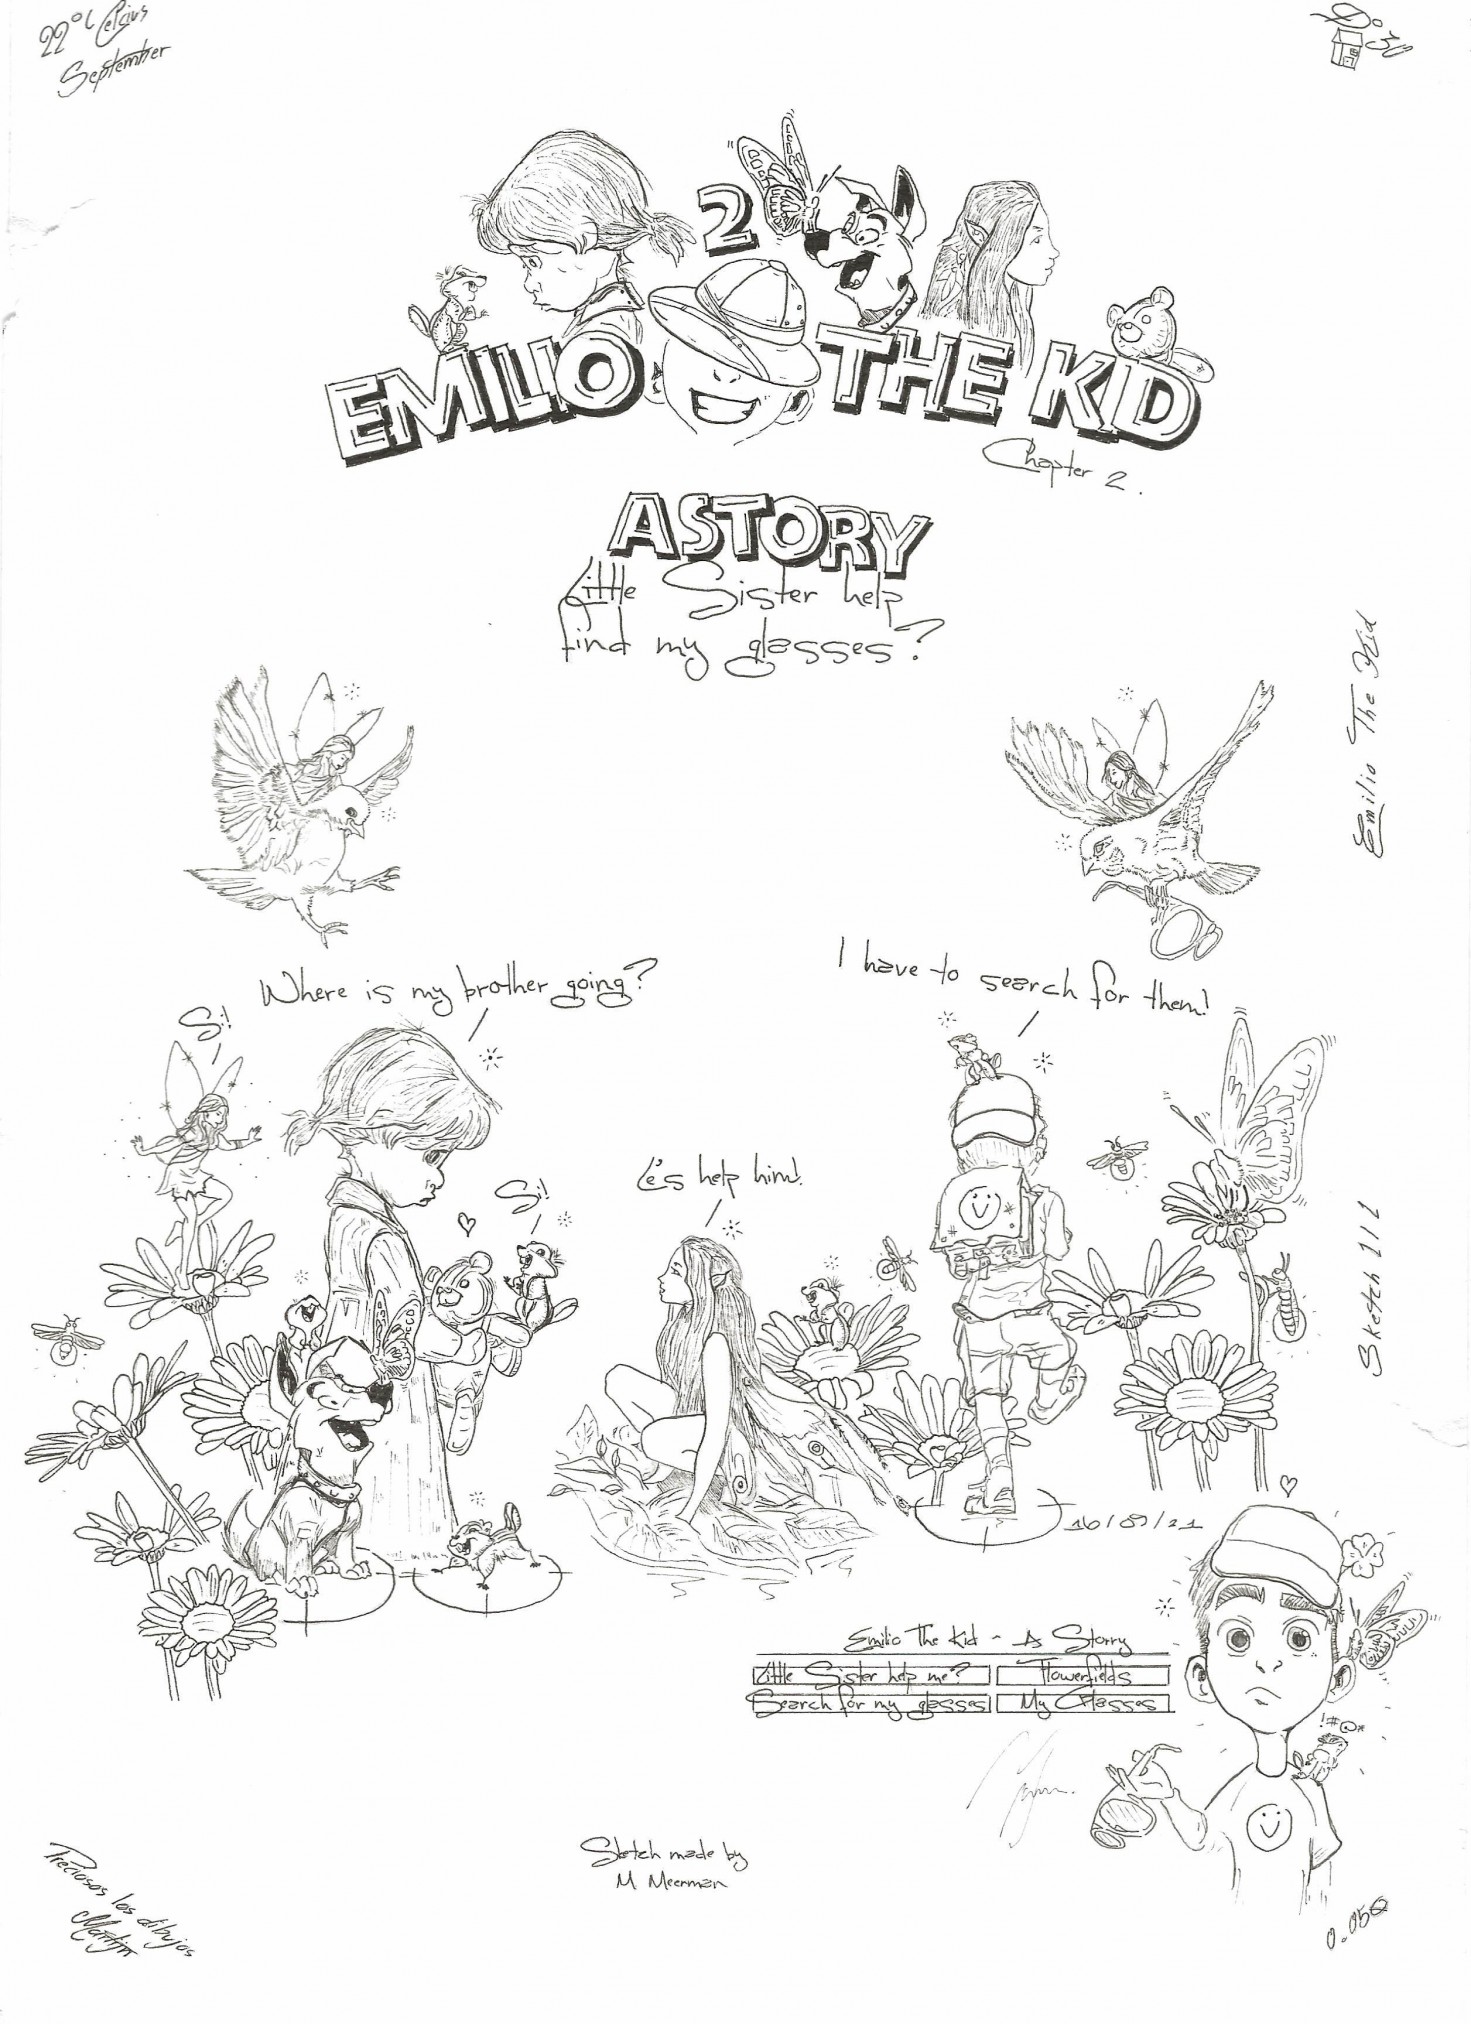 Emilio the Kid : Chapter 2 - The Lost Glasses. The Garden